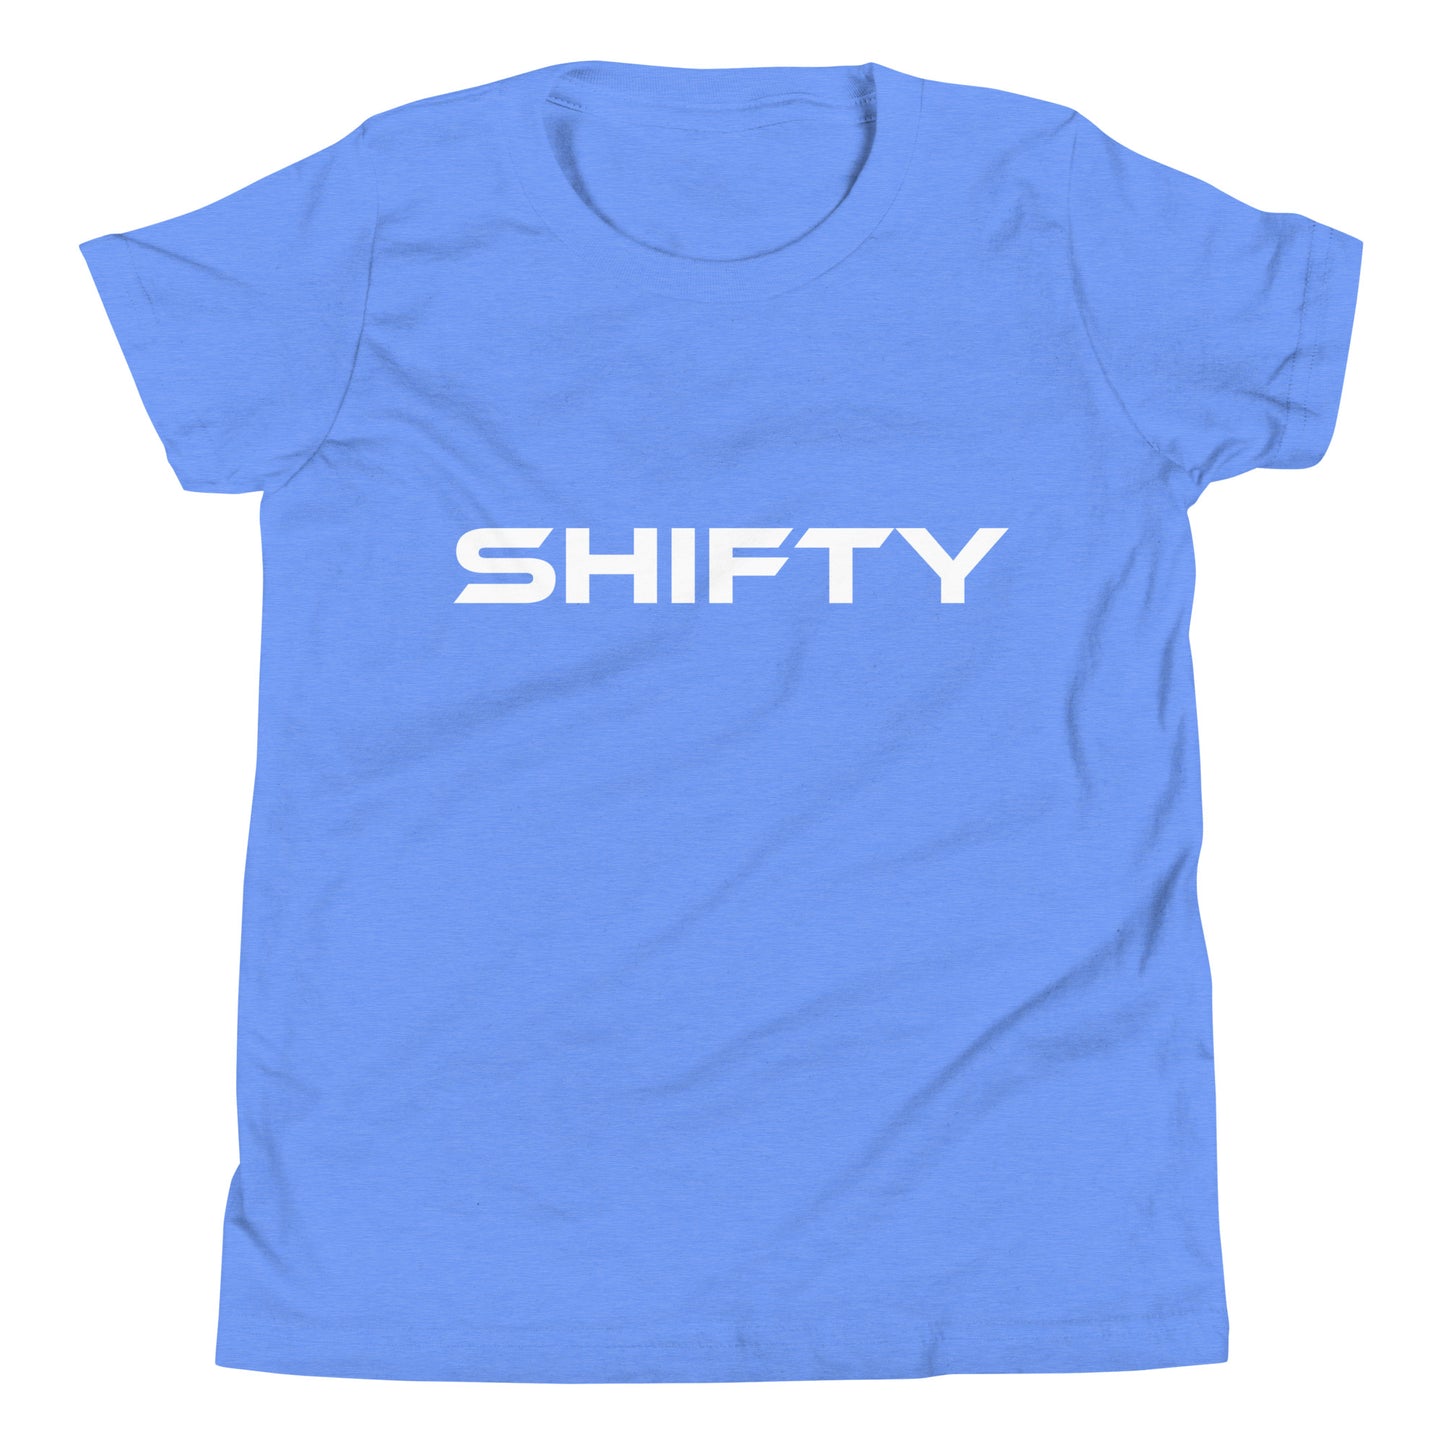 Shifty Youth Short Sleeve T-Shirt - Perfect Fit for Active Kids